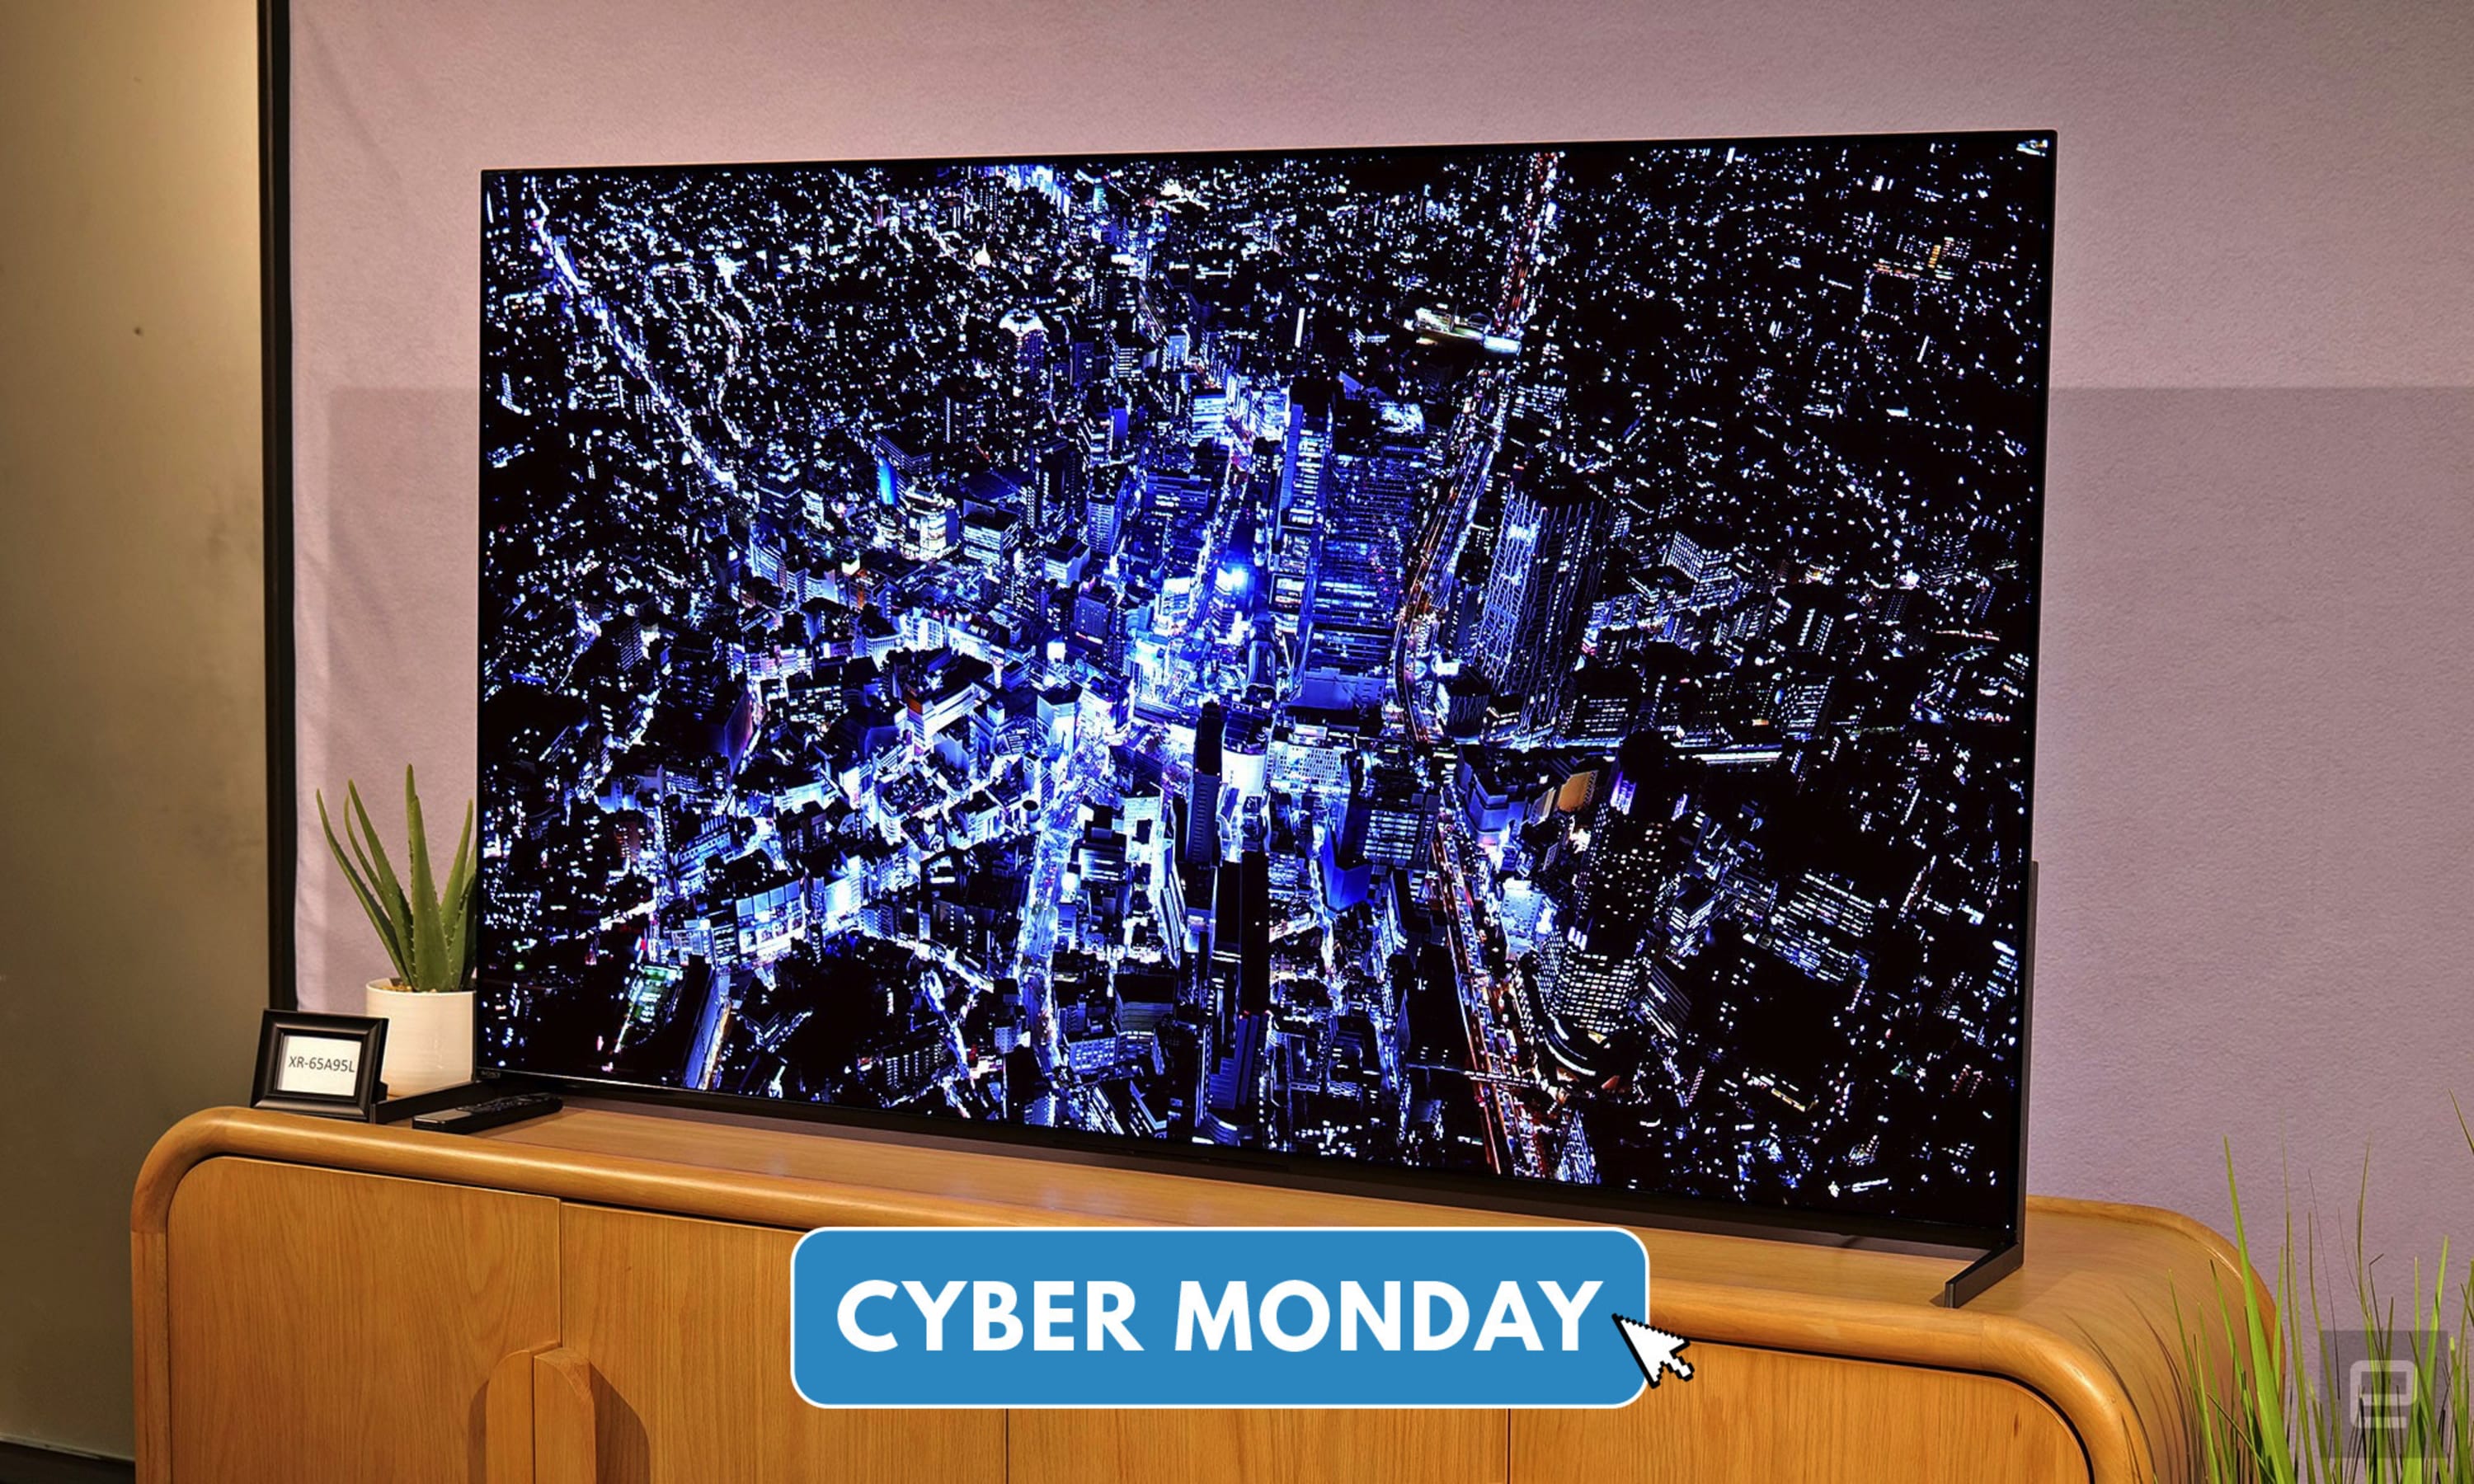 The best Cyber Monday TV deals that are still available: Save hundreds on sets from Samsung, Sony, LG and more